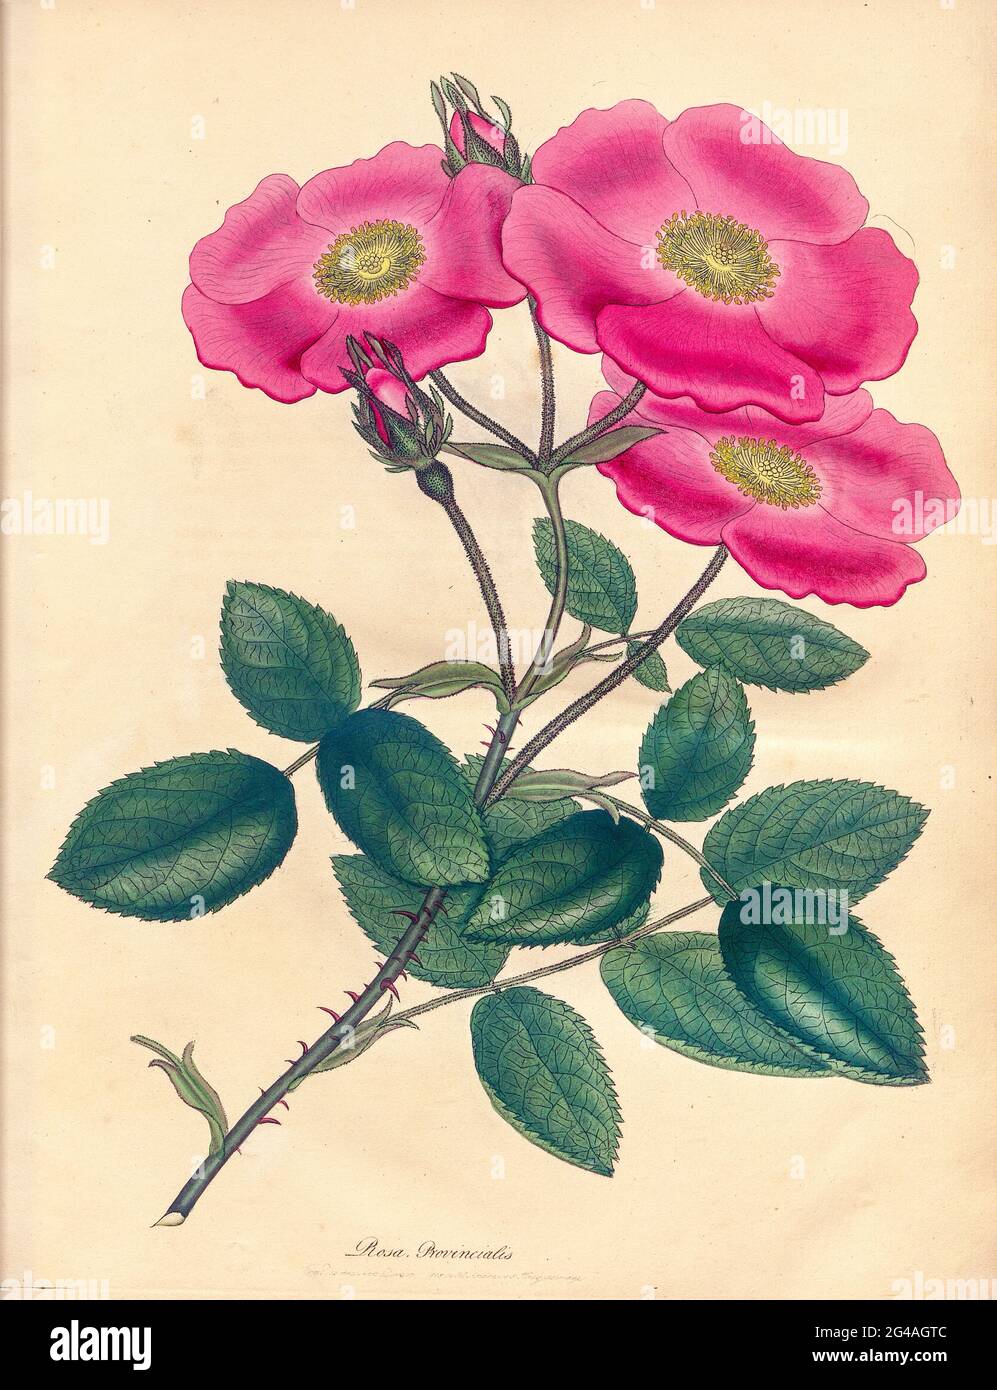 ROSA Provincialis, Province Rose From the book Roses, or, A monograph of the genus Rosa : containing coloured figures of all the known species and beautiful varieties, drawn, engraved, described, and coloured, from living plants. by Andrews, Henry Charles, Published in London : printed by R. Taylor and Co. ; 1805. Stock Photo